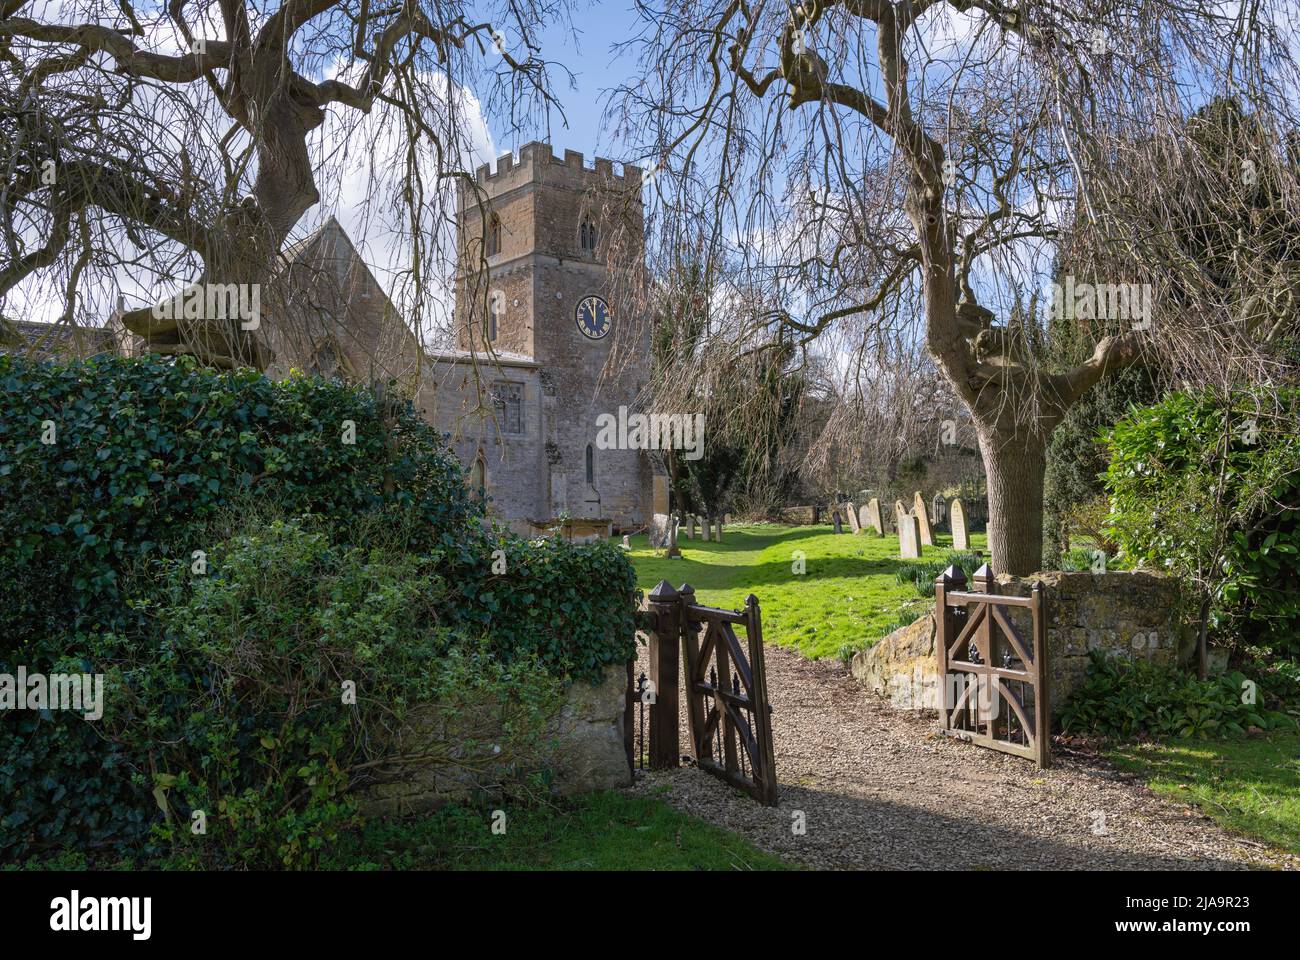 The Cotswold church at Dumbleton, Gloucestershire, England. Stock Photo